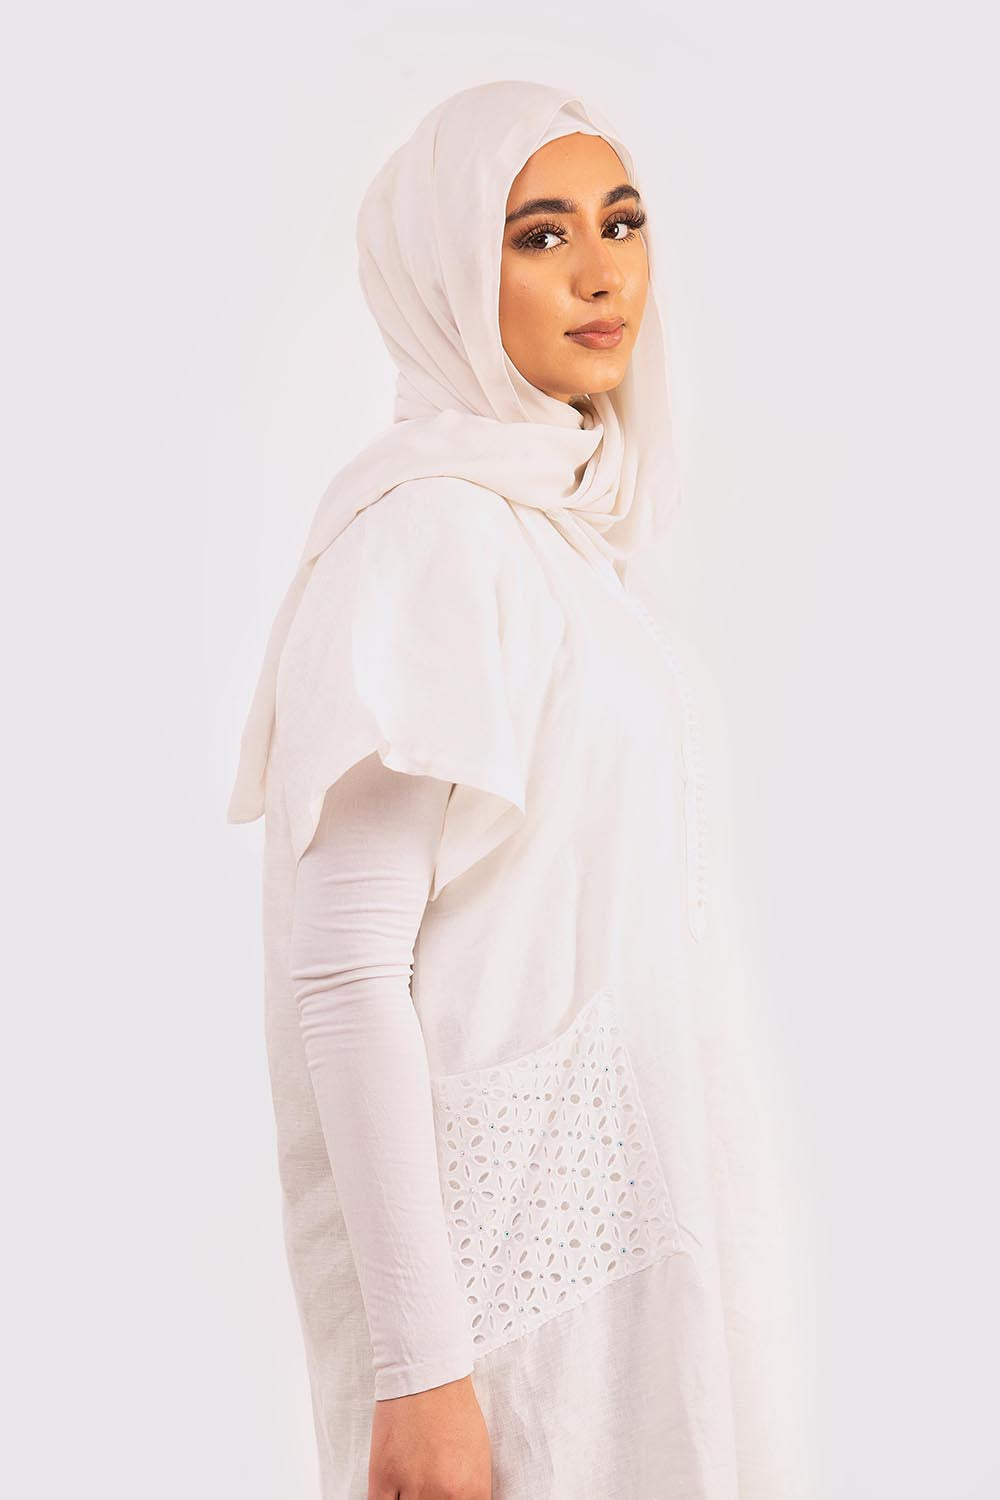 Djellaba Narcisse Short Sleeve Hooded Linen and Lace Maxi Dress Kaftan in White